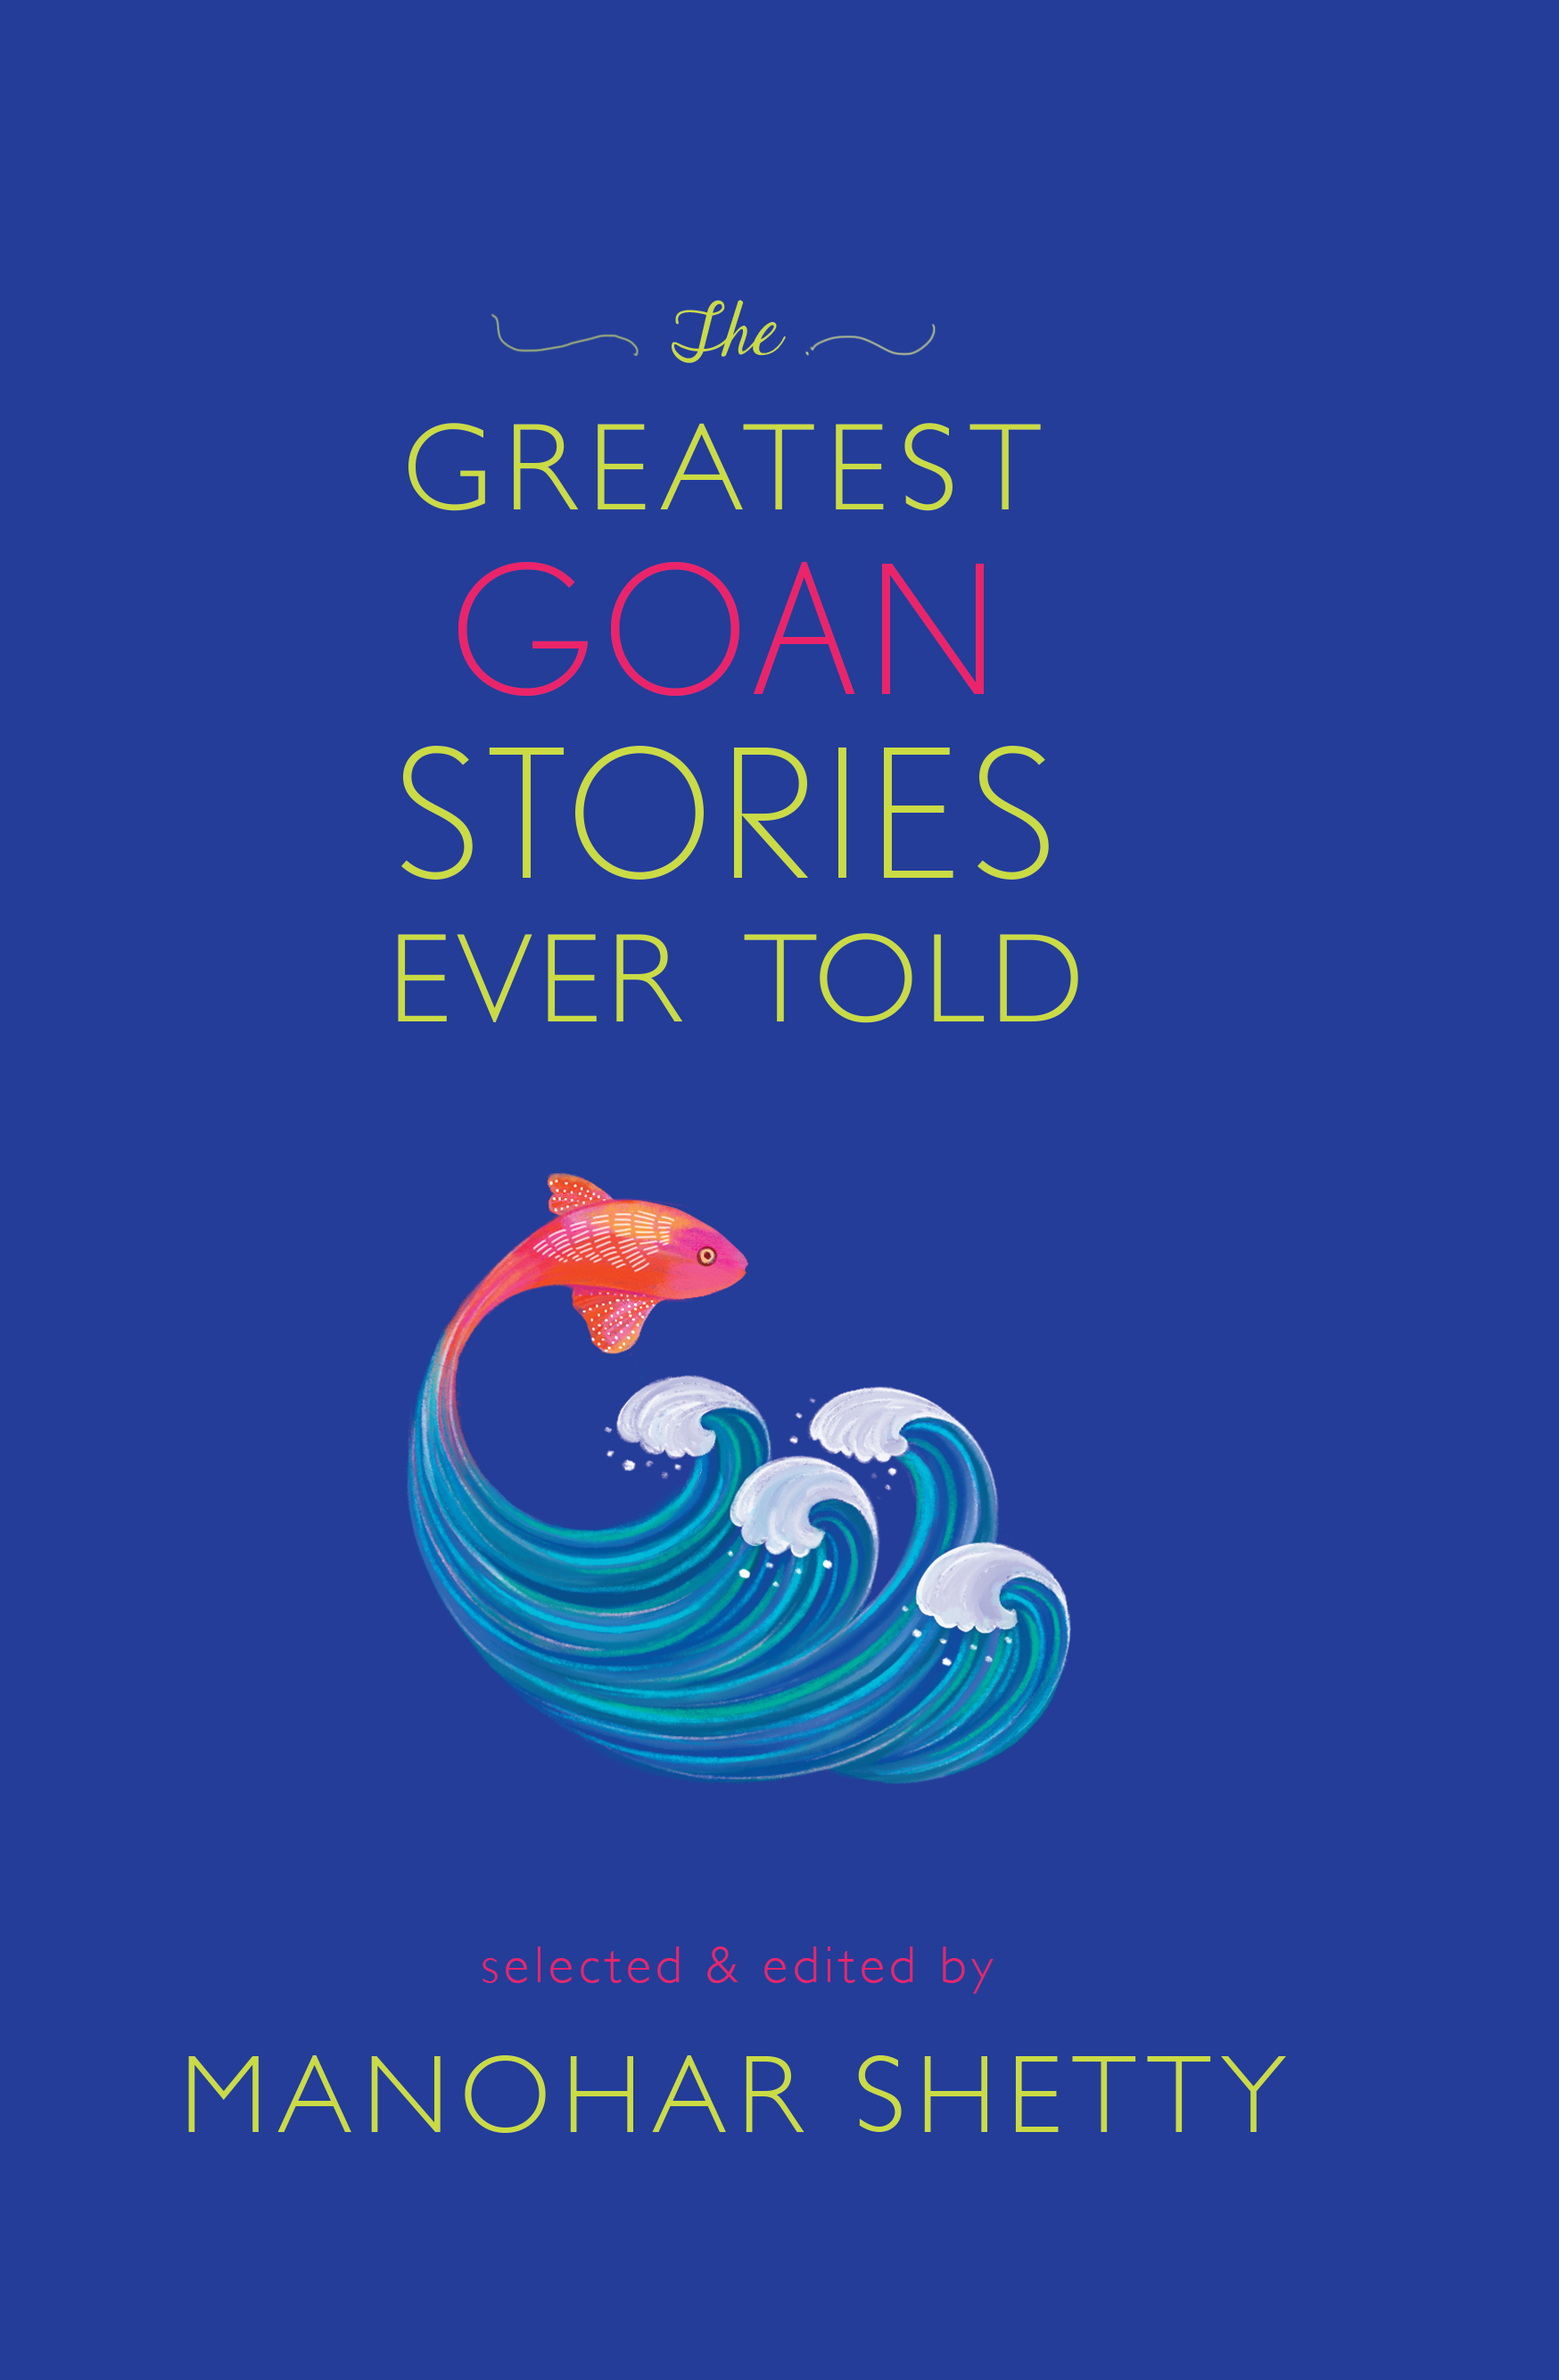 The Greatest Goan Stories Ever Told